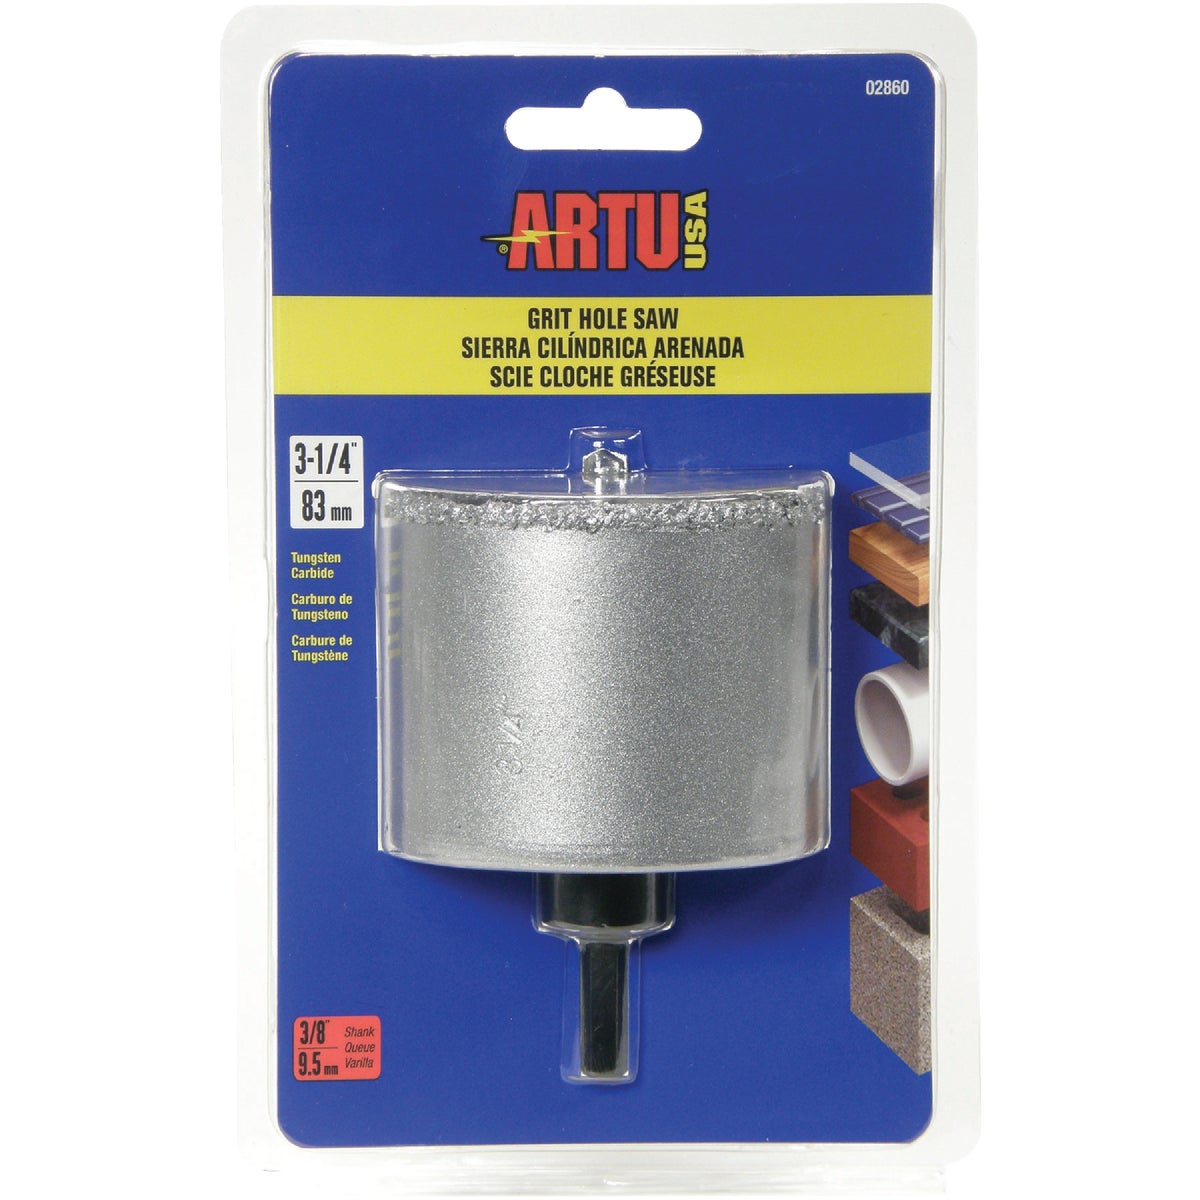 ARTU 3-1/4 In. Tungsten Carbide Grit Hole Saw with Arbor and Pilot Bit